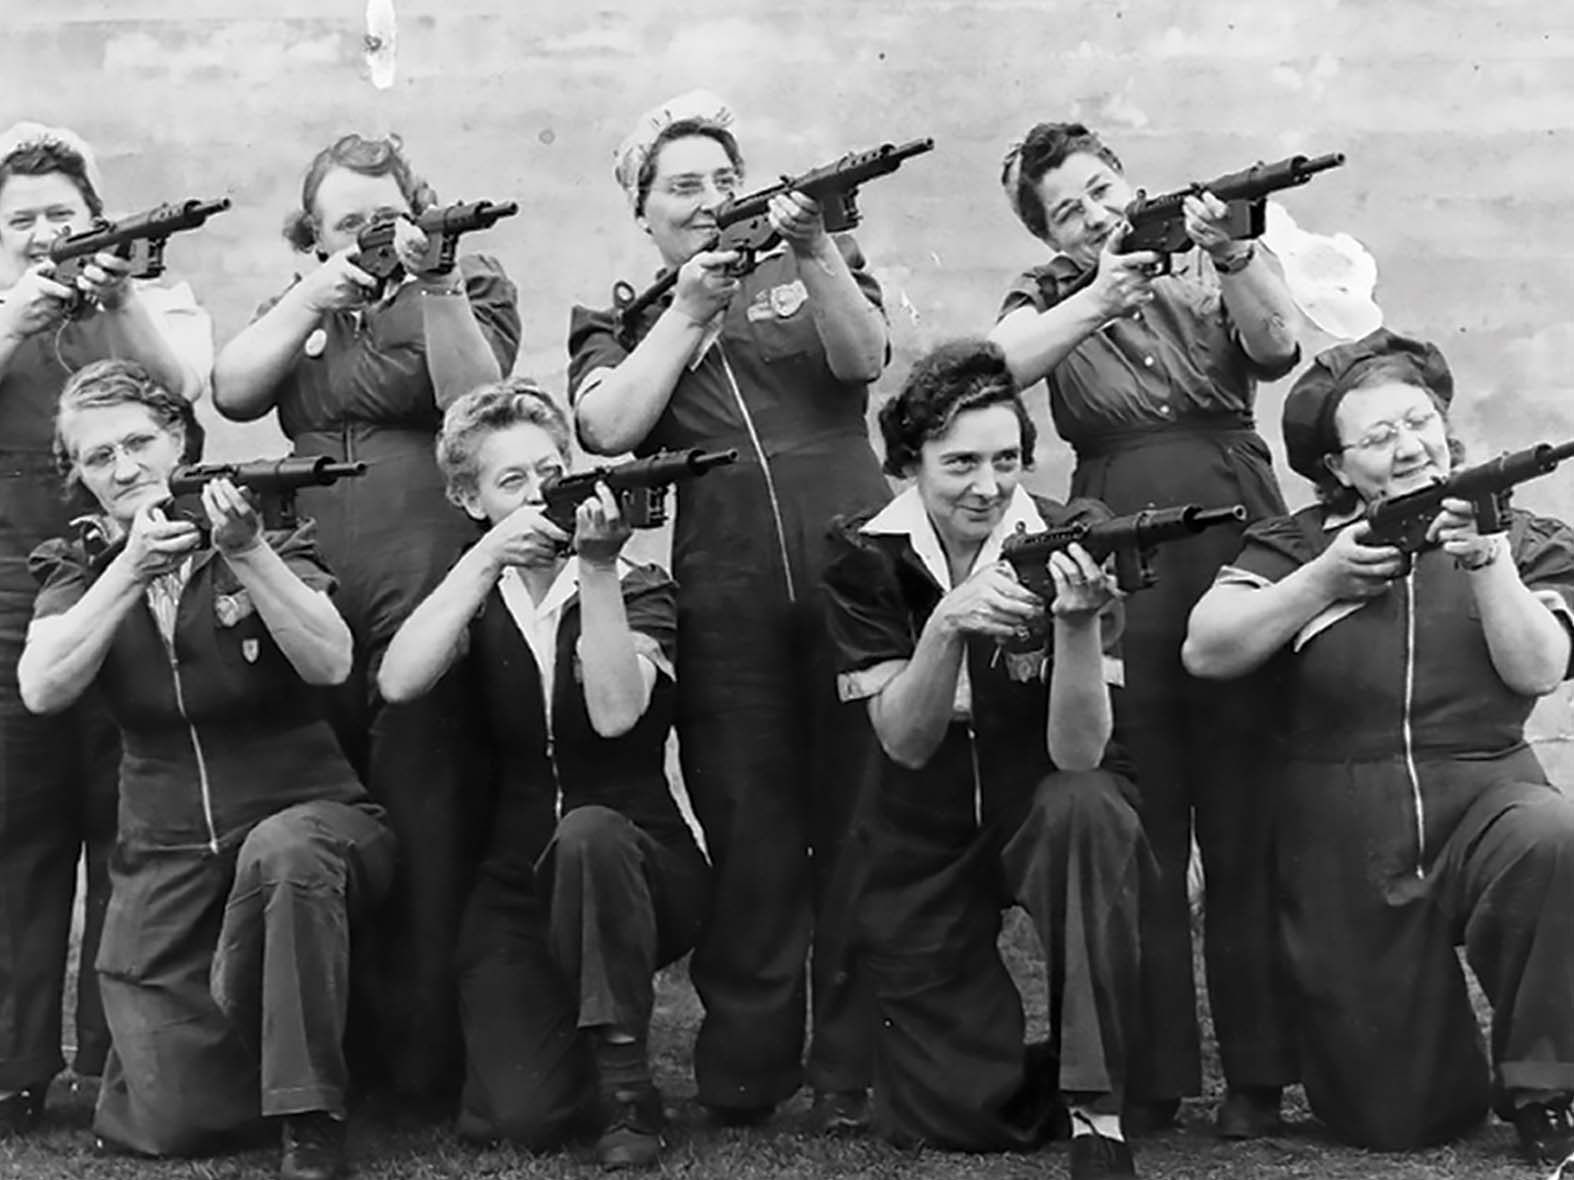 women rifles historical image lakeview